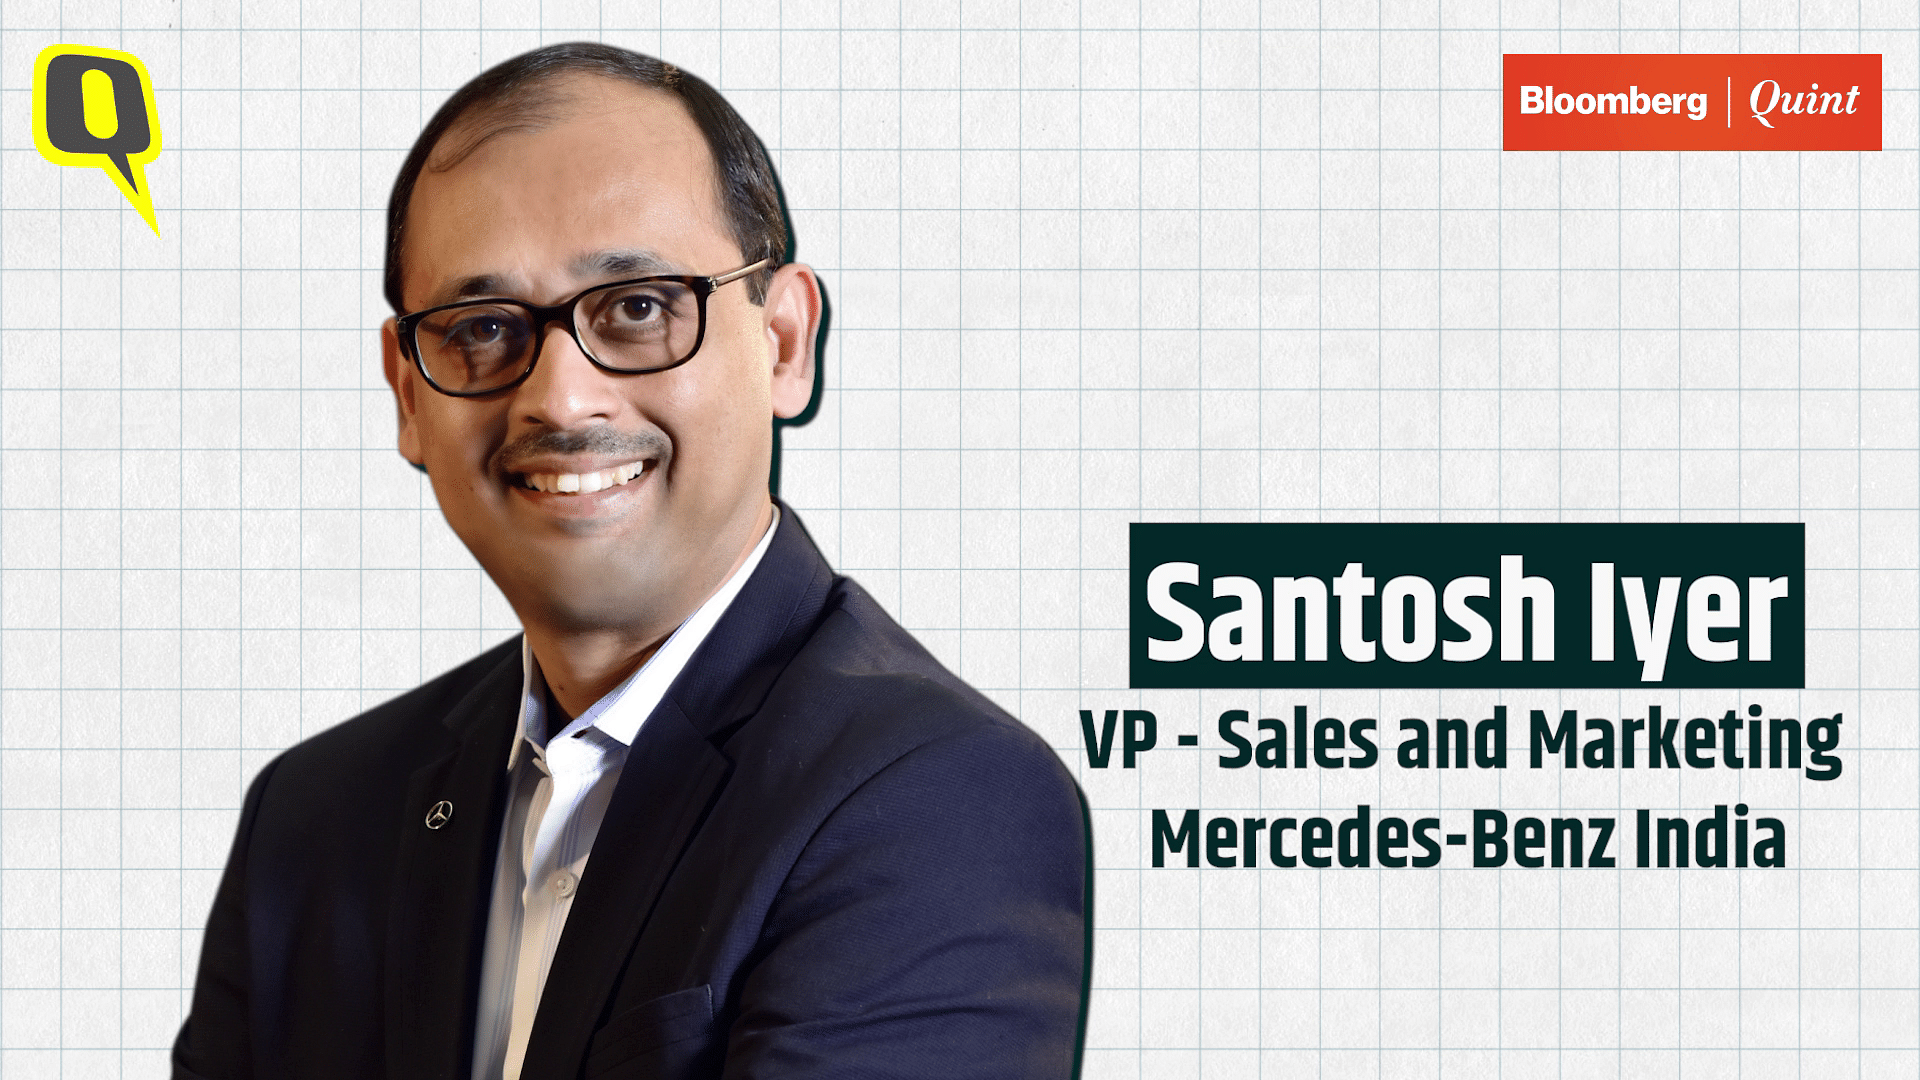 <div class="paragraphs"><p>Santosh Iyer, VP – Sales and Marketing, Mercedes-Benz India shares his insights on the future of work and the auto industry.&nbsp;</p></div>